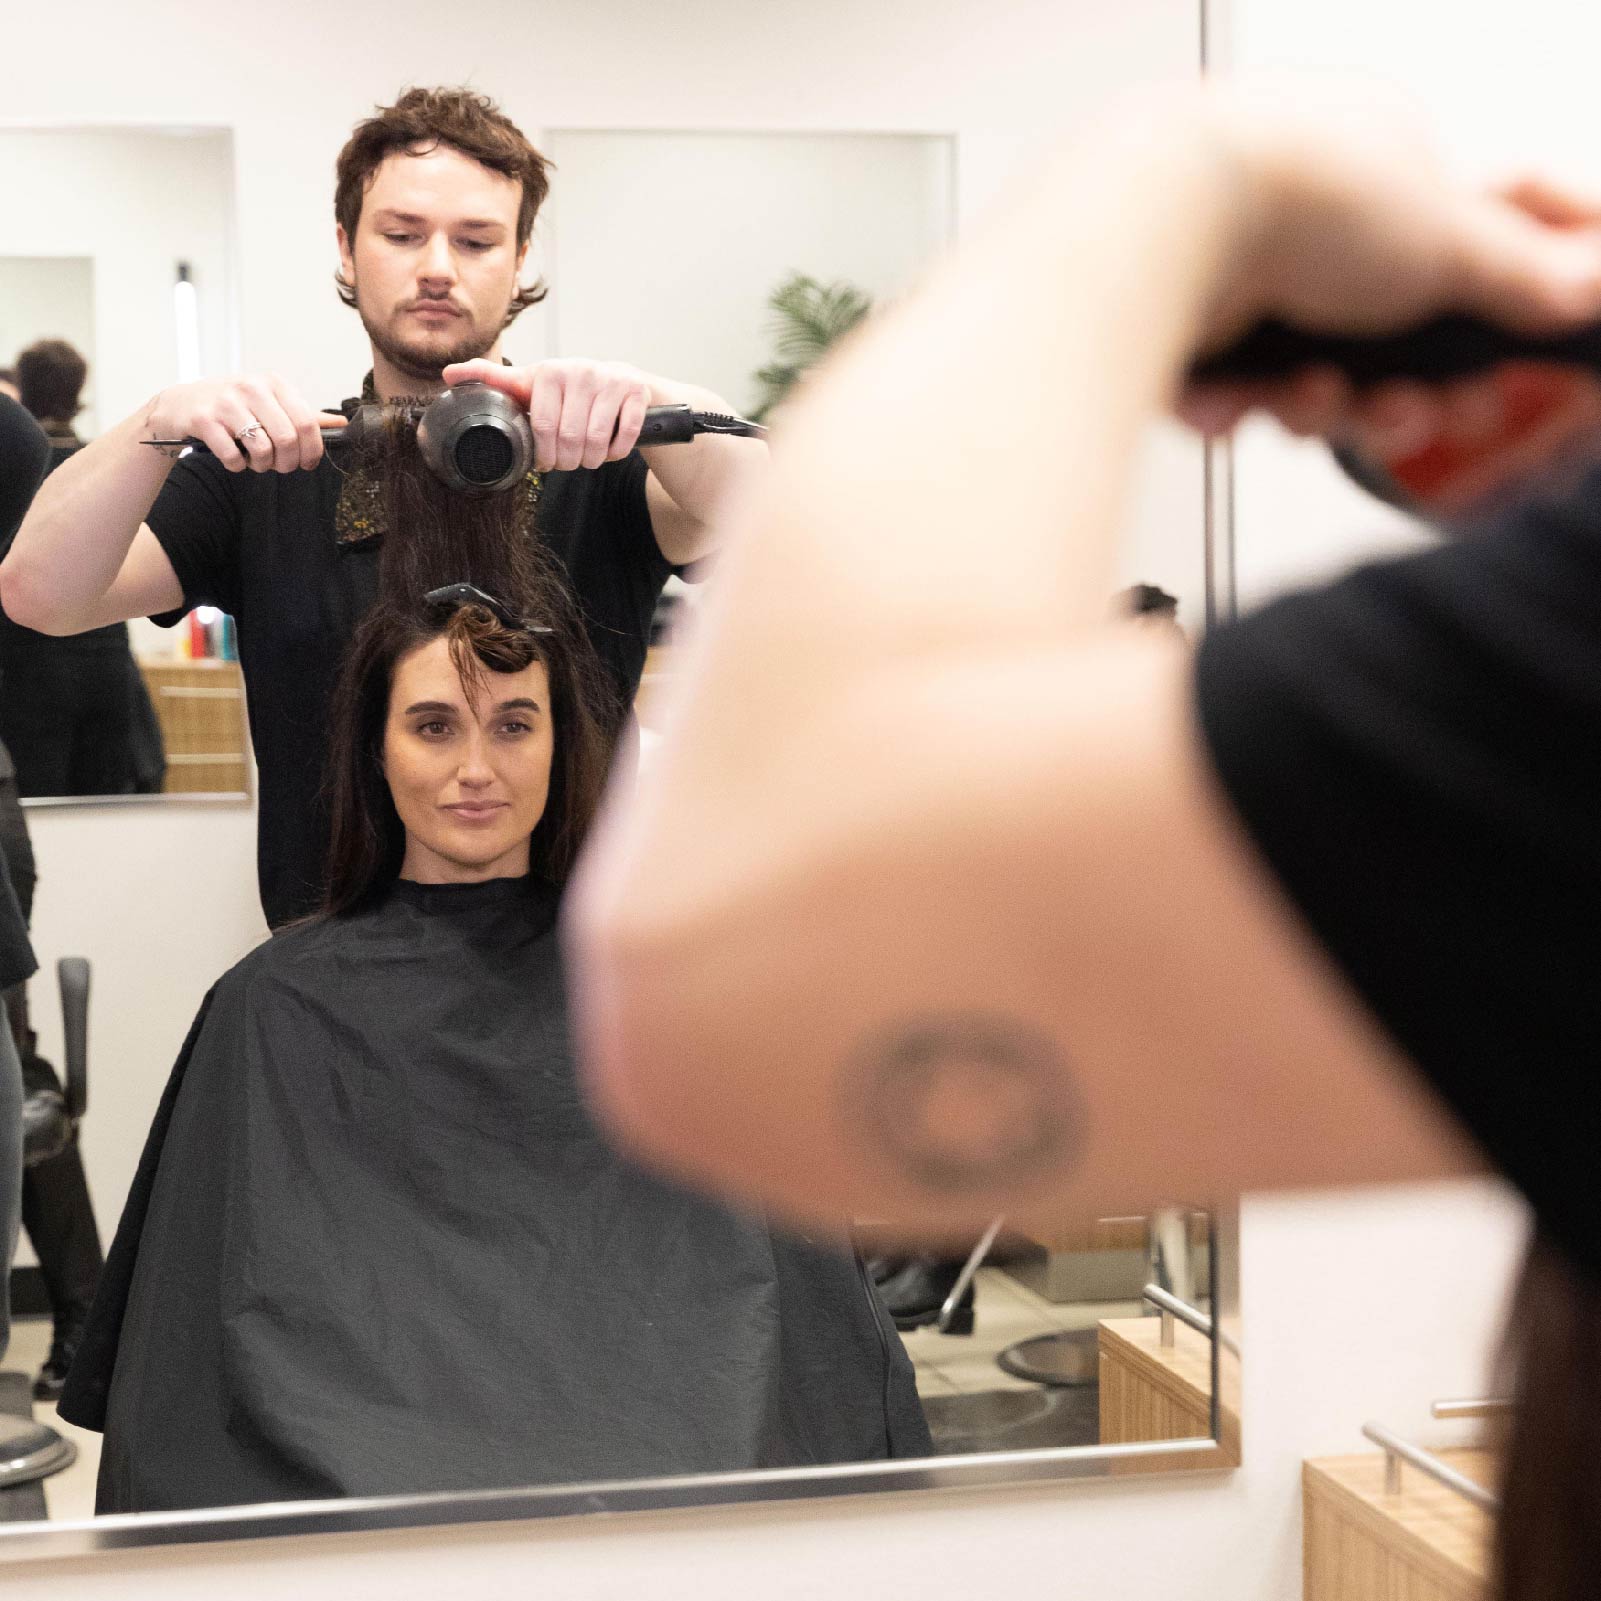 Hairdresser with a tattoo is giving a blow out to a client